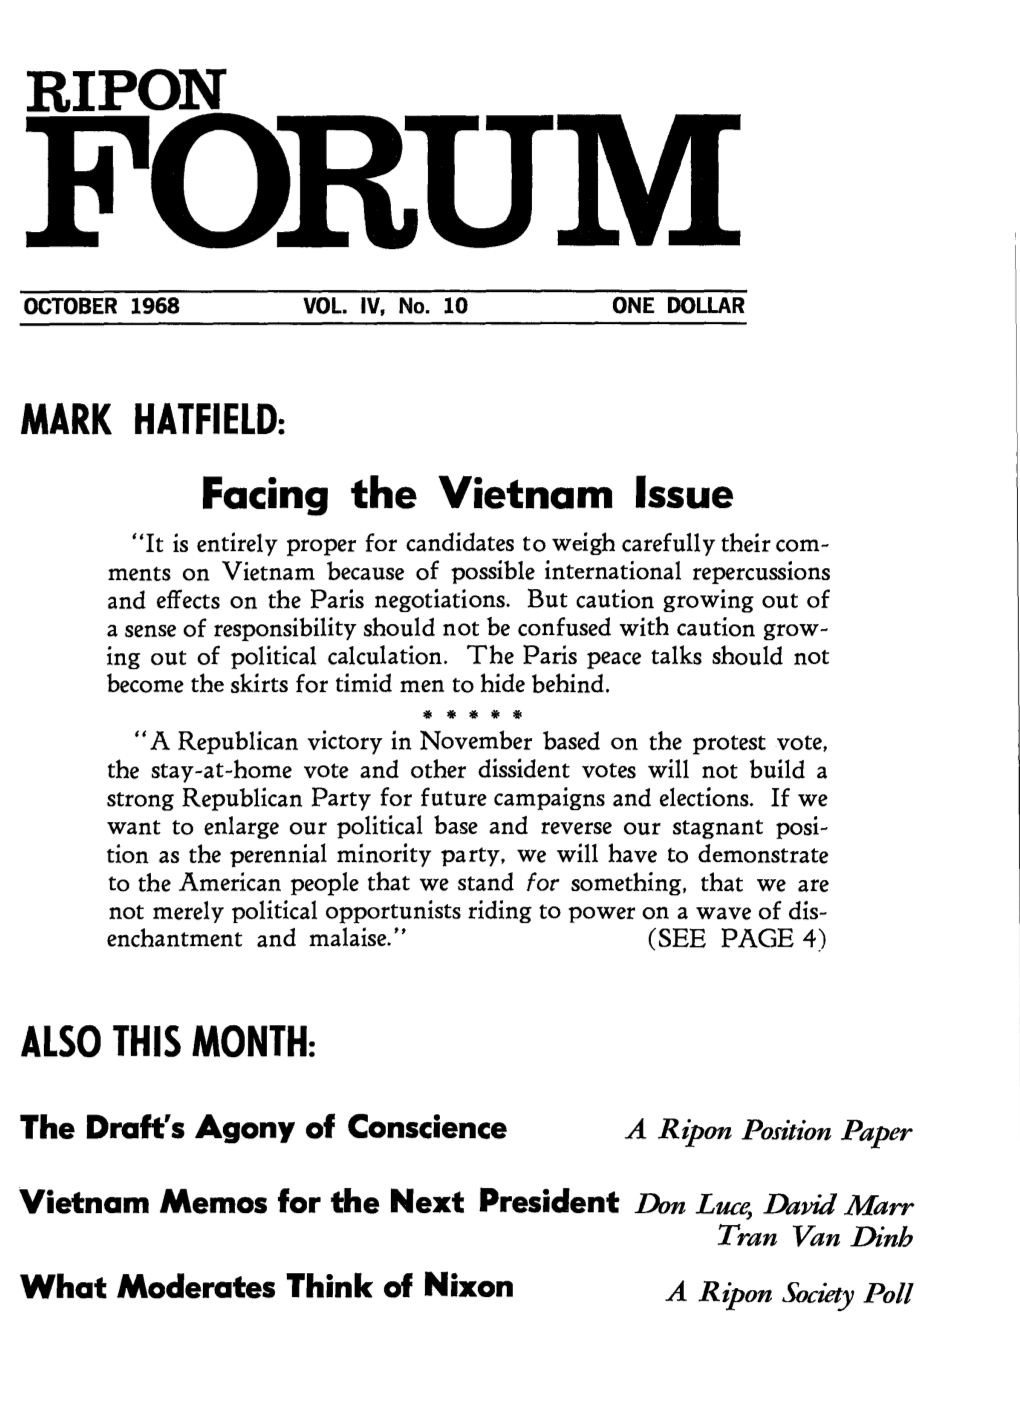 MARK HATFIELD: Facing the Vietnam Issue ALSO THIS MONTH